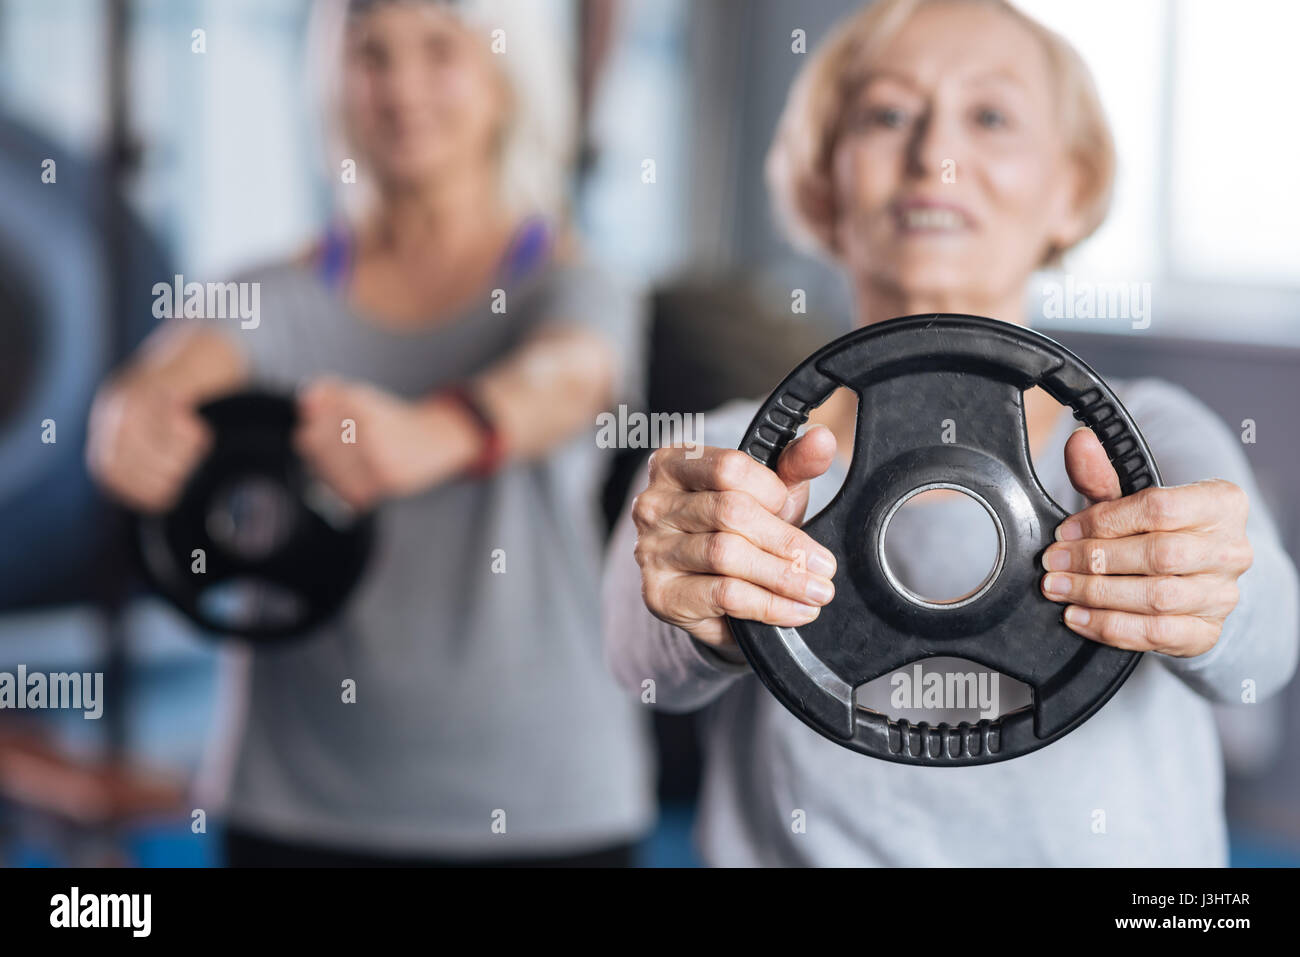 Physical activities. Selective focus of a weight disc being held by a nice active aged woman while doing physical activities Stock Photo